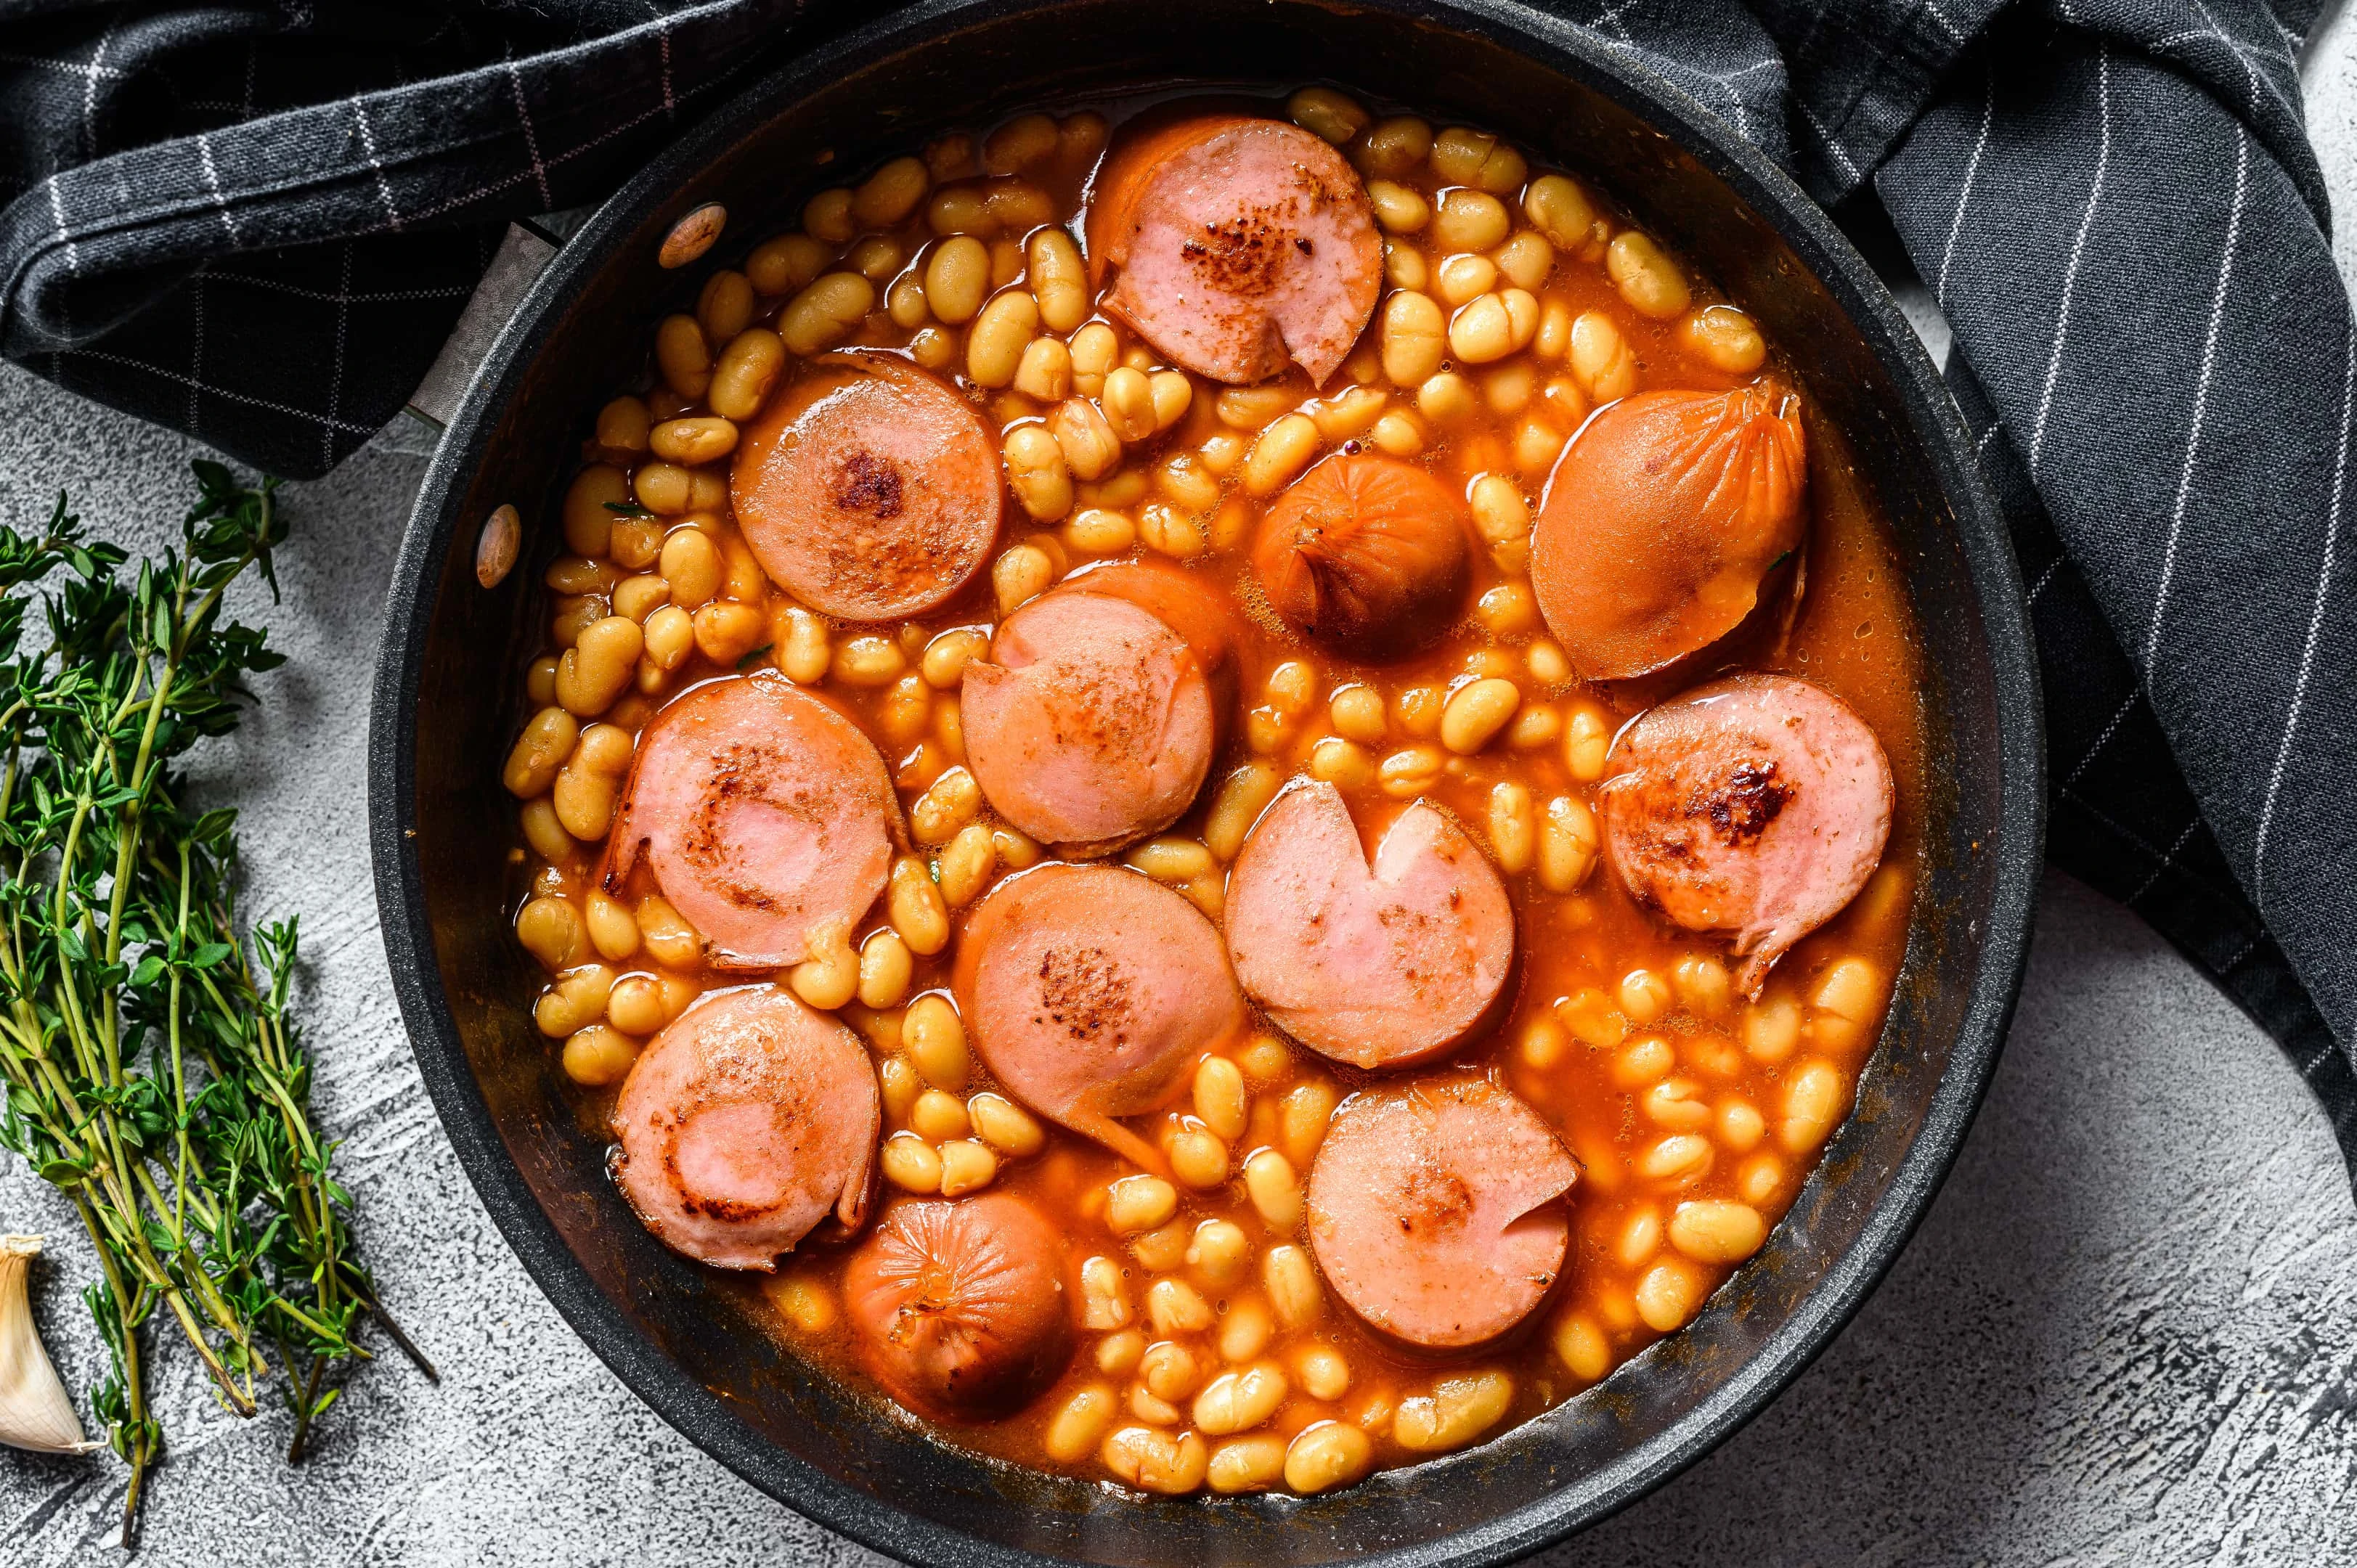 Navy beans with sausages in tomato sauce in a pan. Navy beans are on our list of foods that are high in lysine.